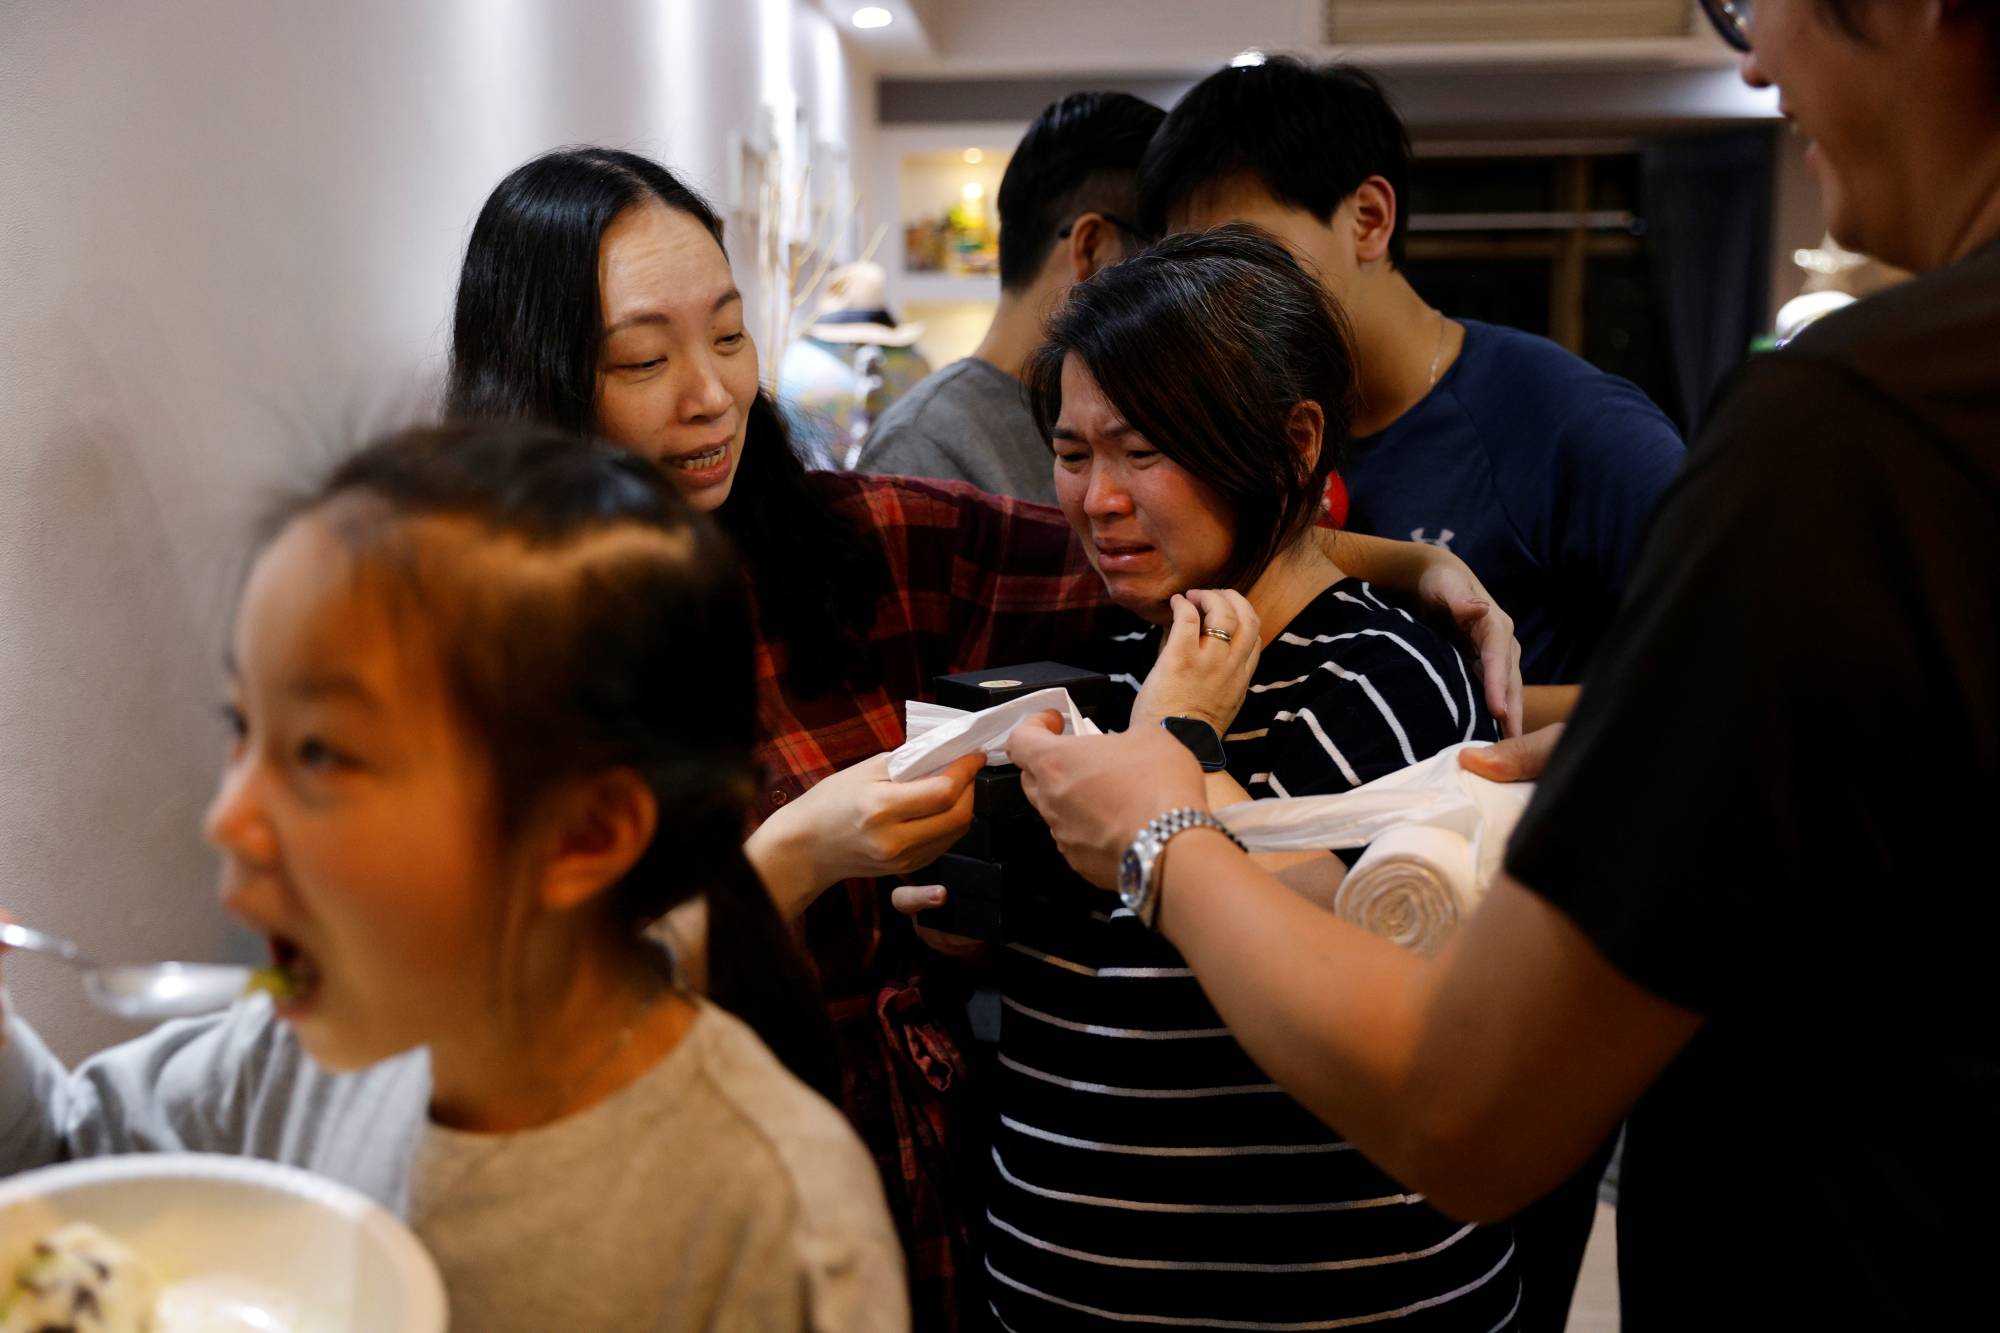 Asa Lai cries next to her friend during a farewell party for the Lai family before they emigrate to Scotland, at a friend's home in Hong Kong on Dec. 5. | REUTERS 